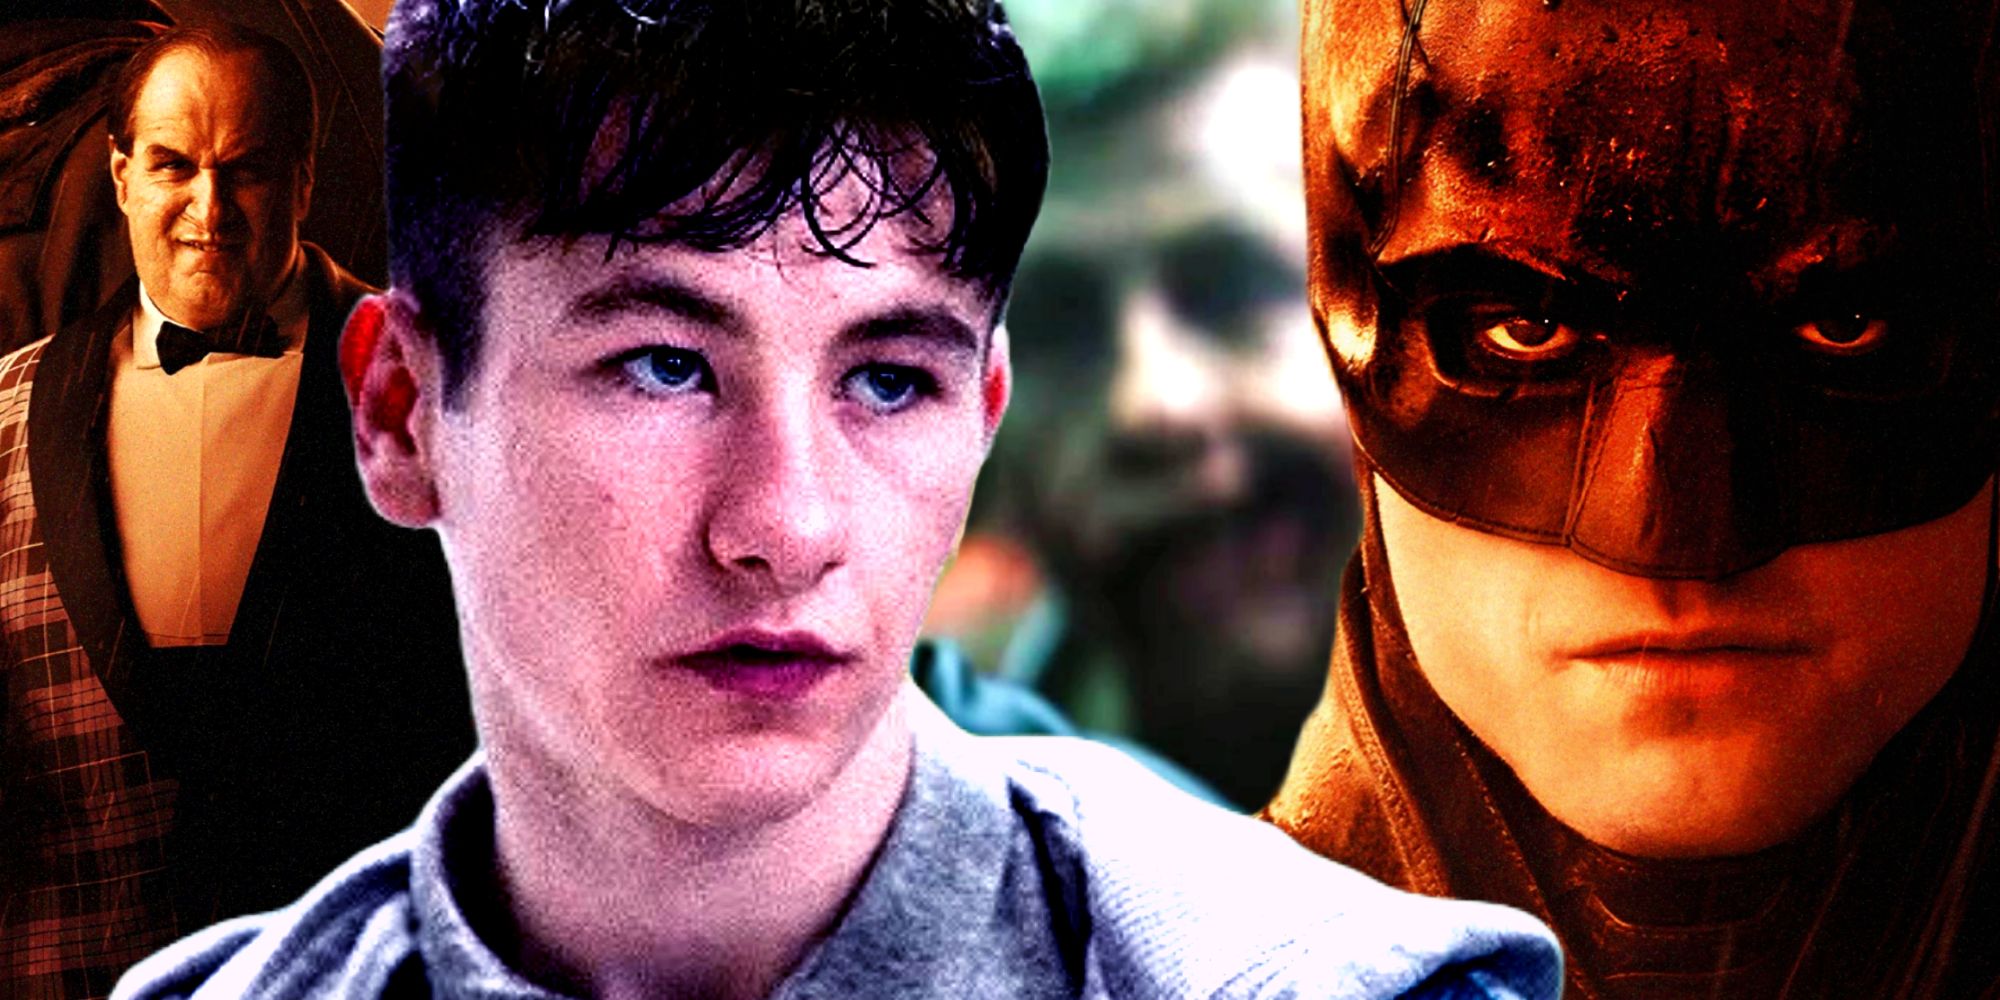 Barry Keoghan as Joker in The Batman and Martin in Killing of a Sacred Deer